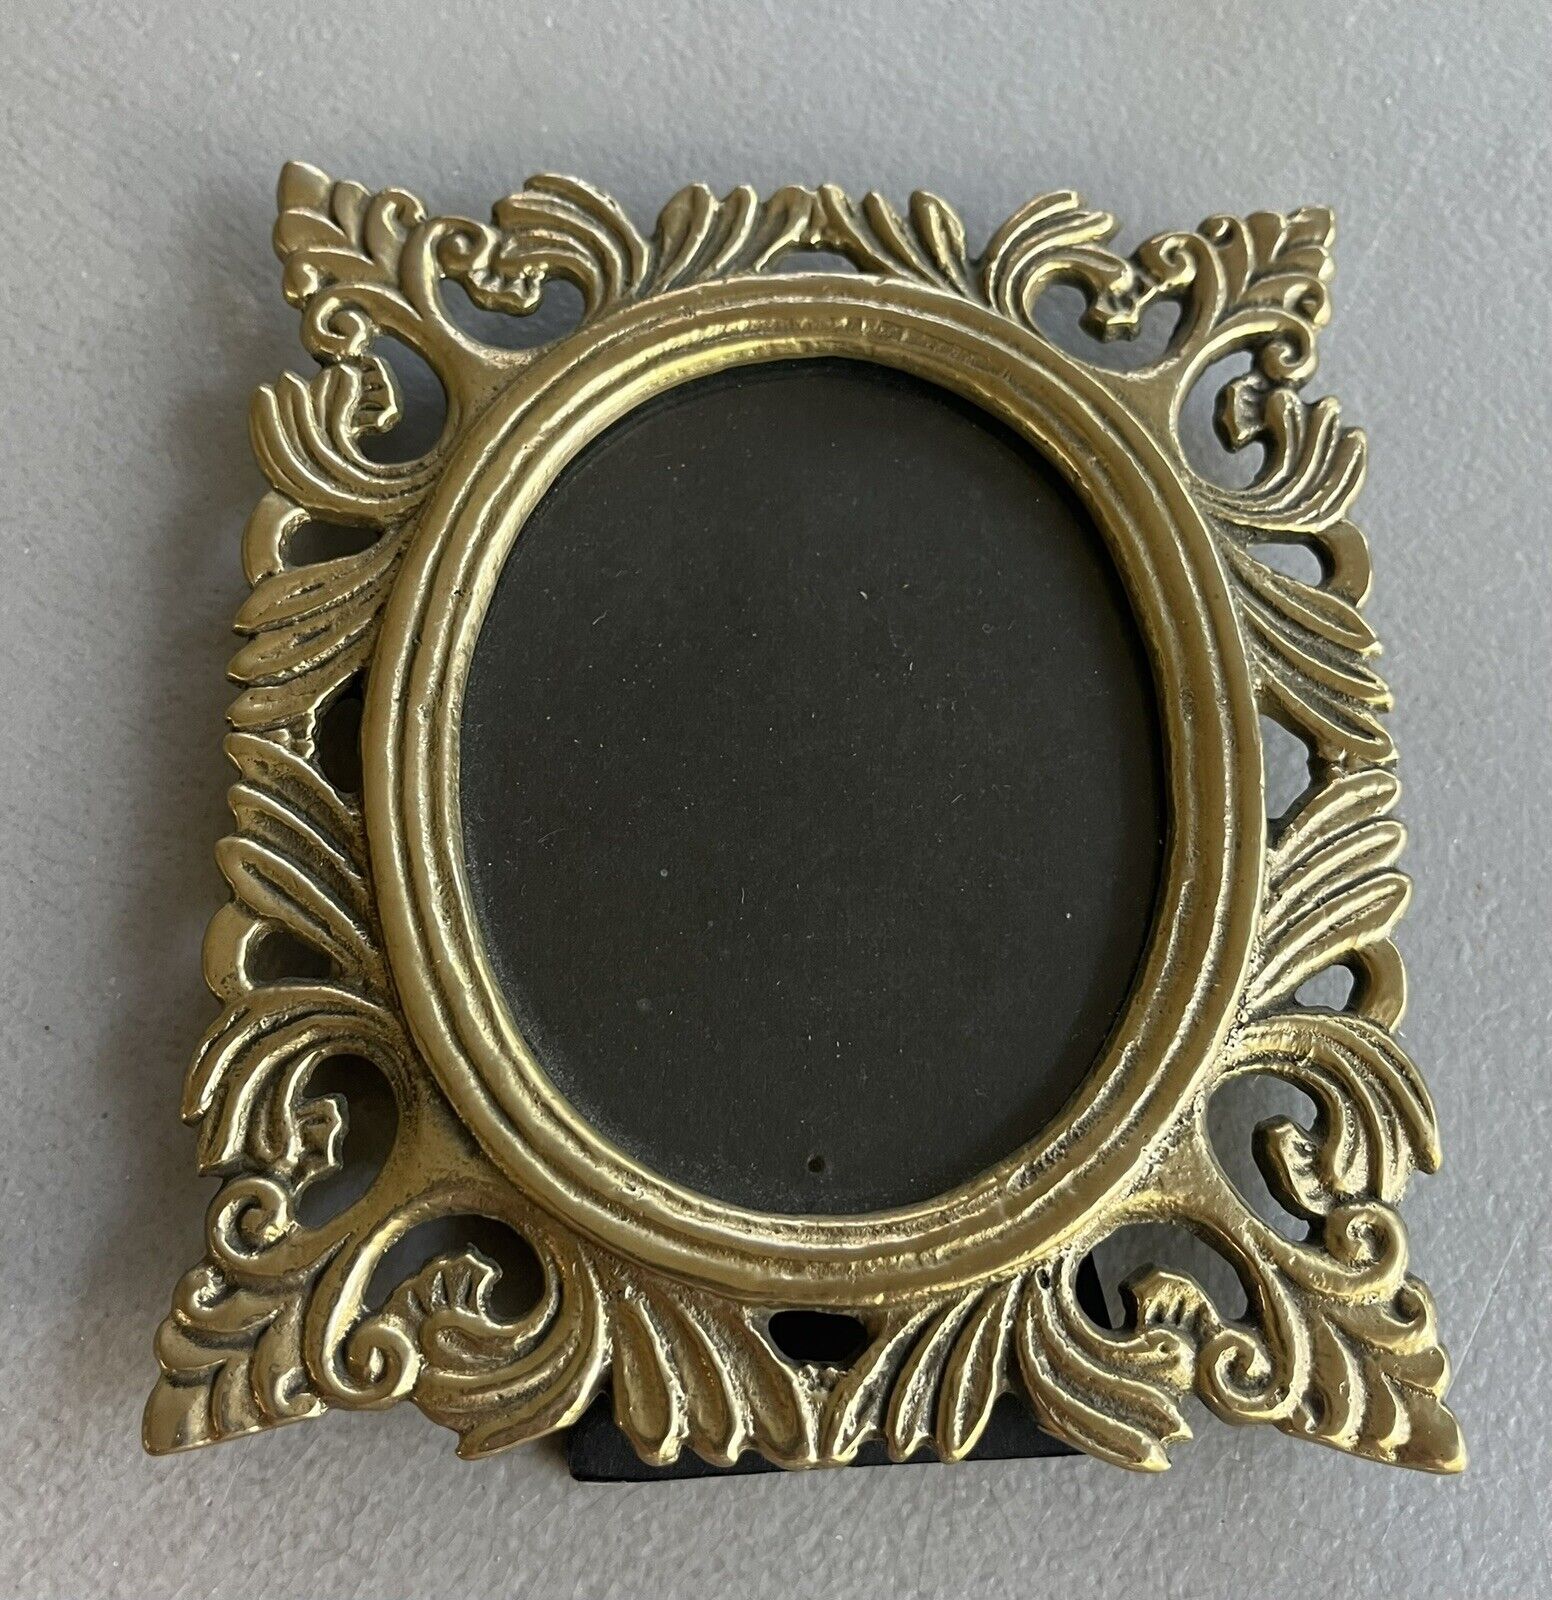 Vintage  Style Metal Ornate Gold Tone Picture Frame 5  X 4.5 Inches